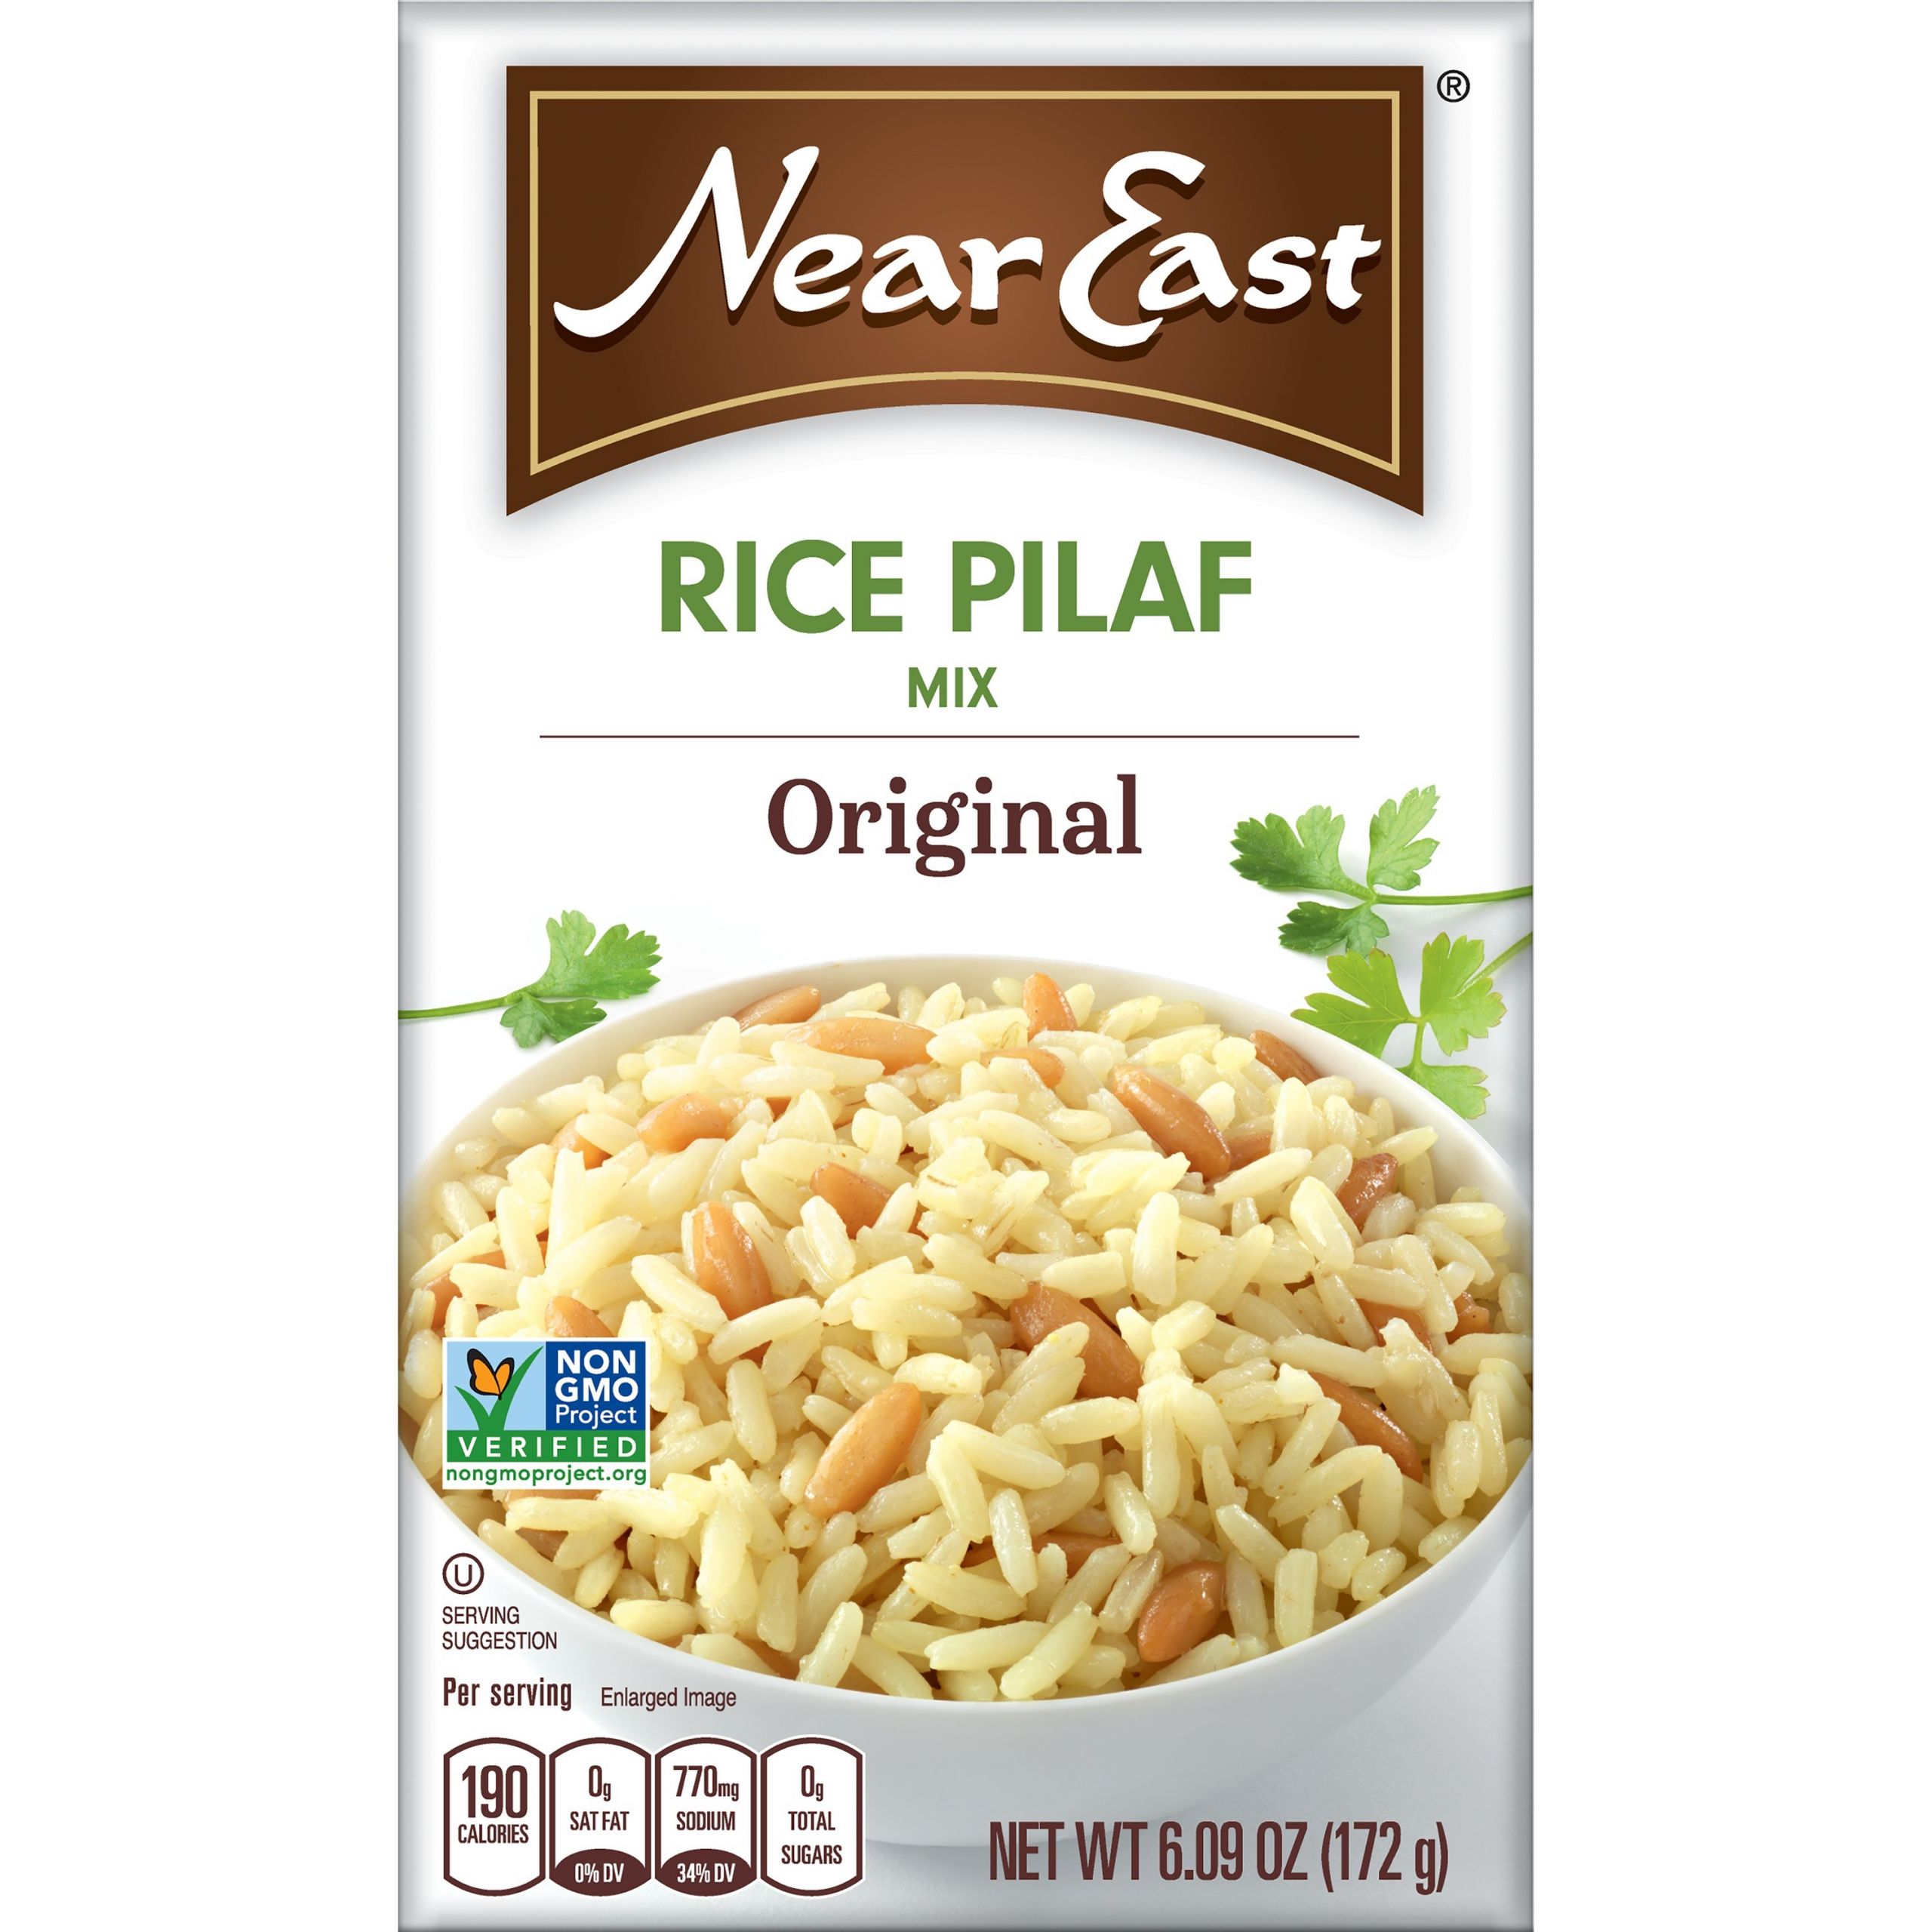 Our 15 Most Popular Near East Rice Pilaf
 Ever